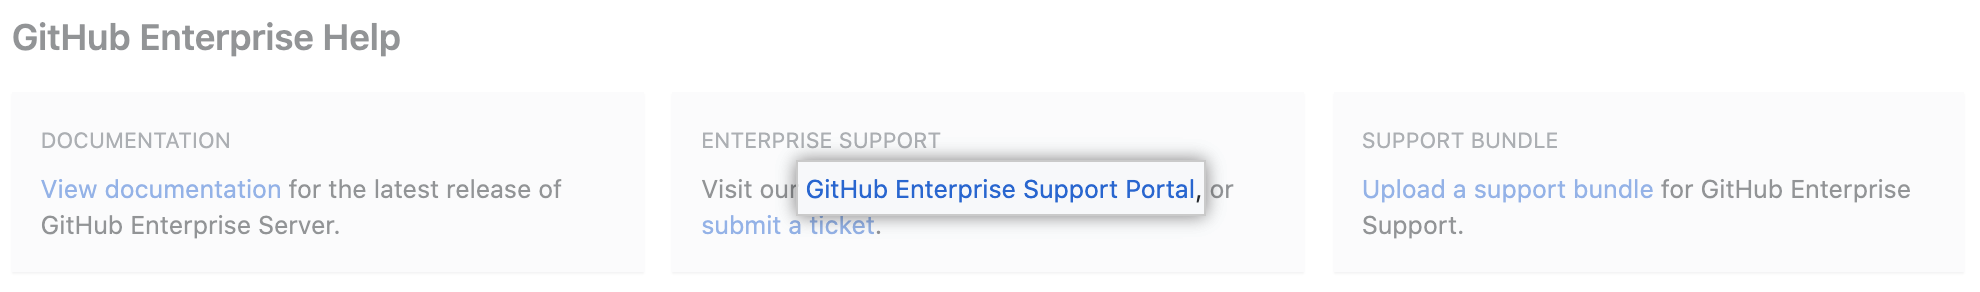 Link to navigate to Enterprise support site